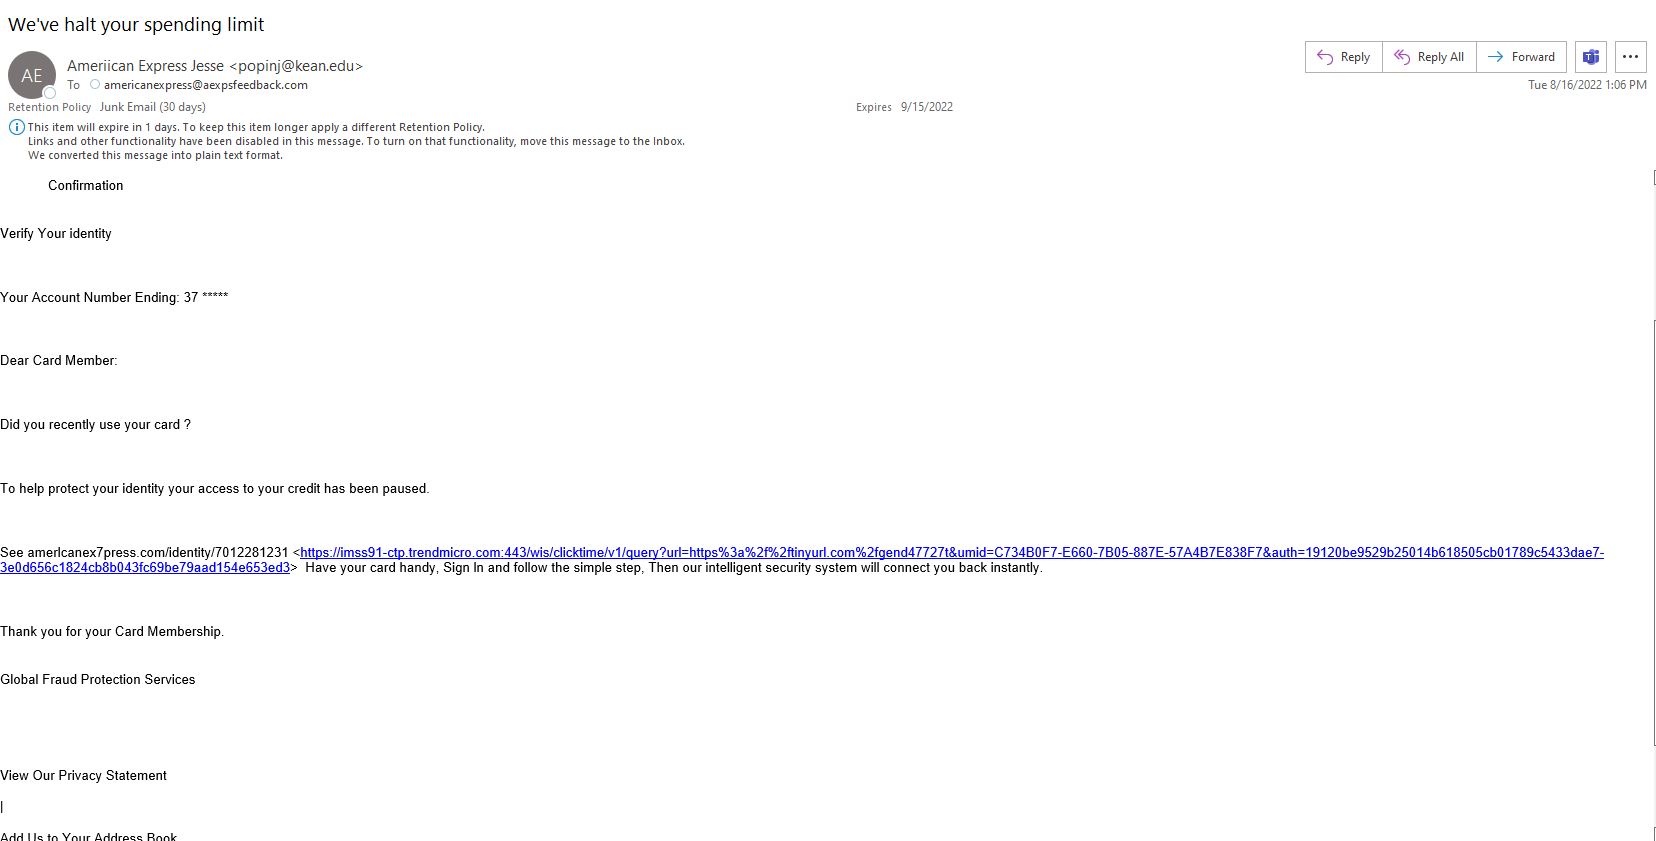 phishing example via email - your credit card spending limit...